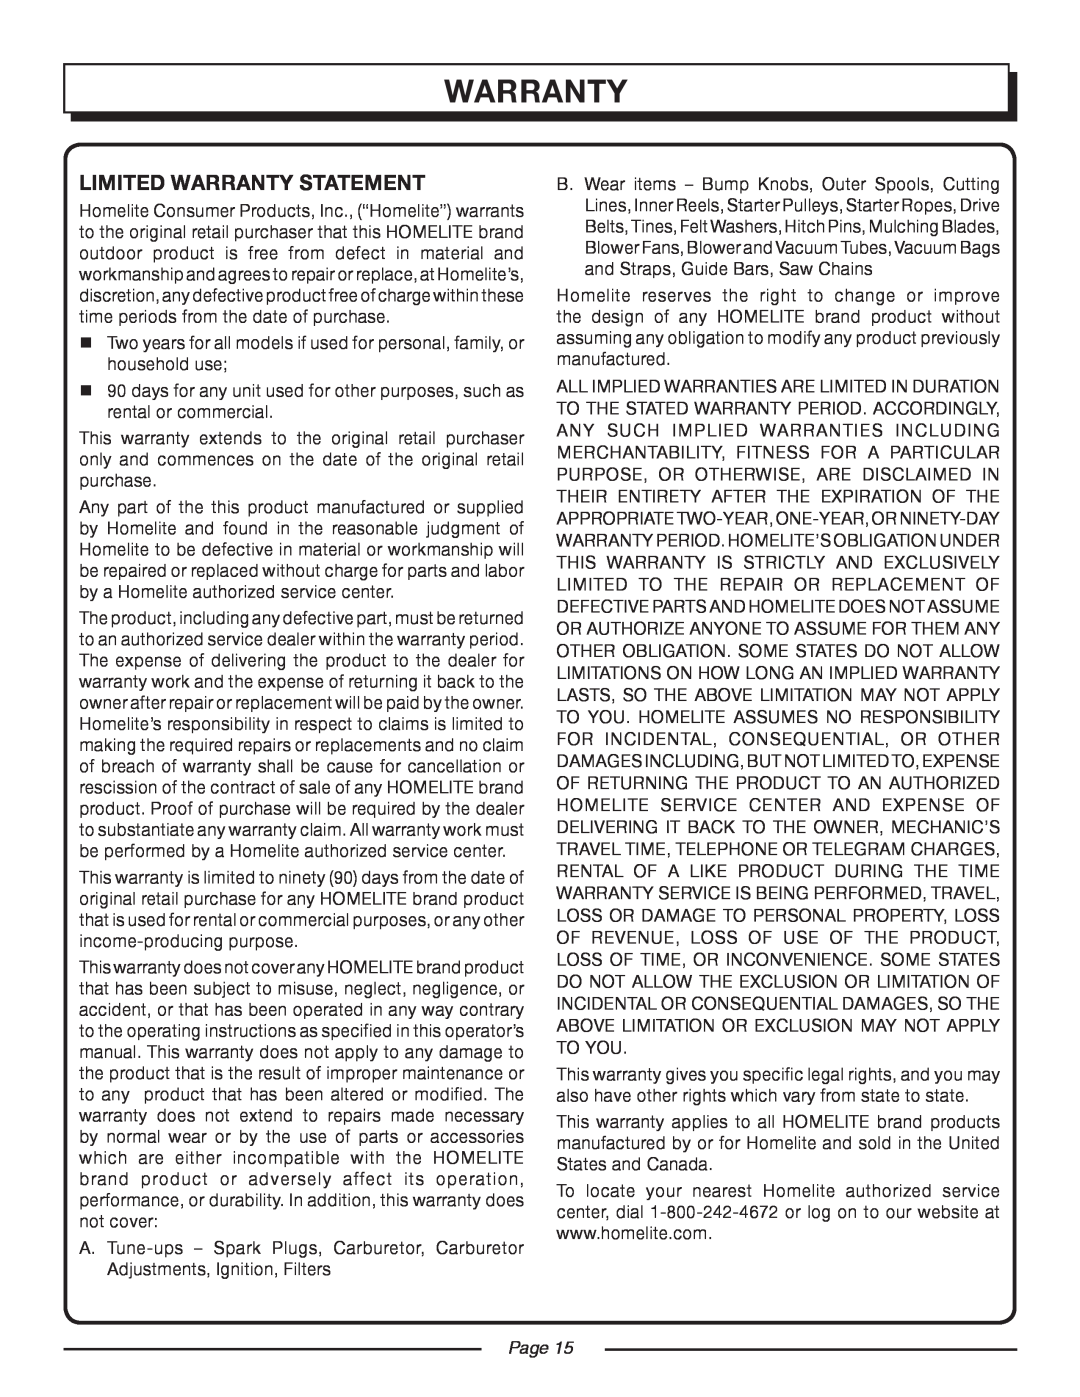 Homelite UT08520 manual Limited Warranty Statement, Page 